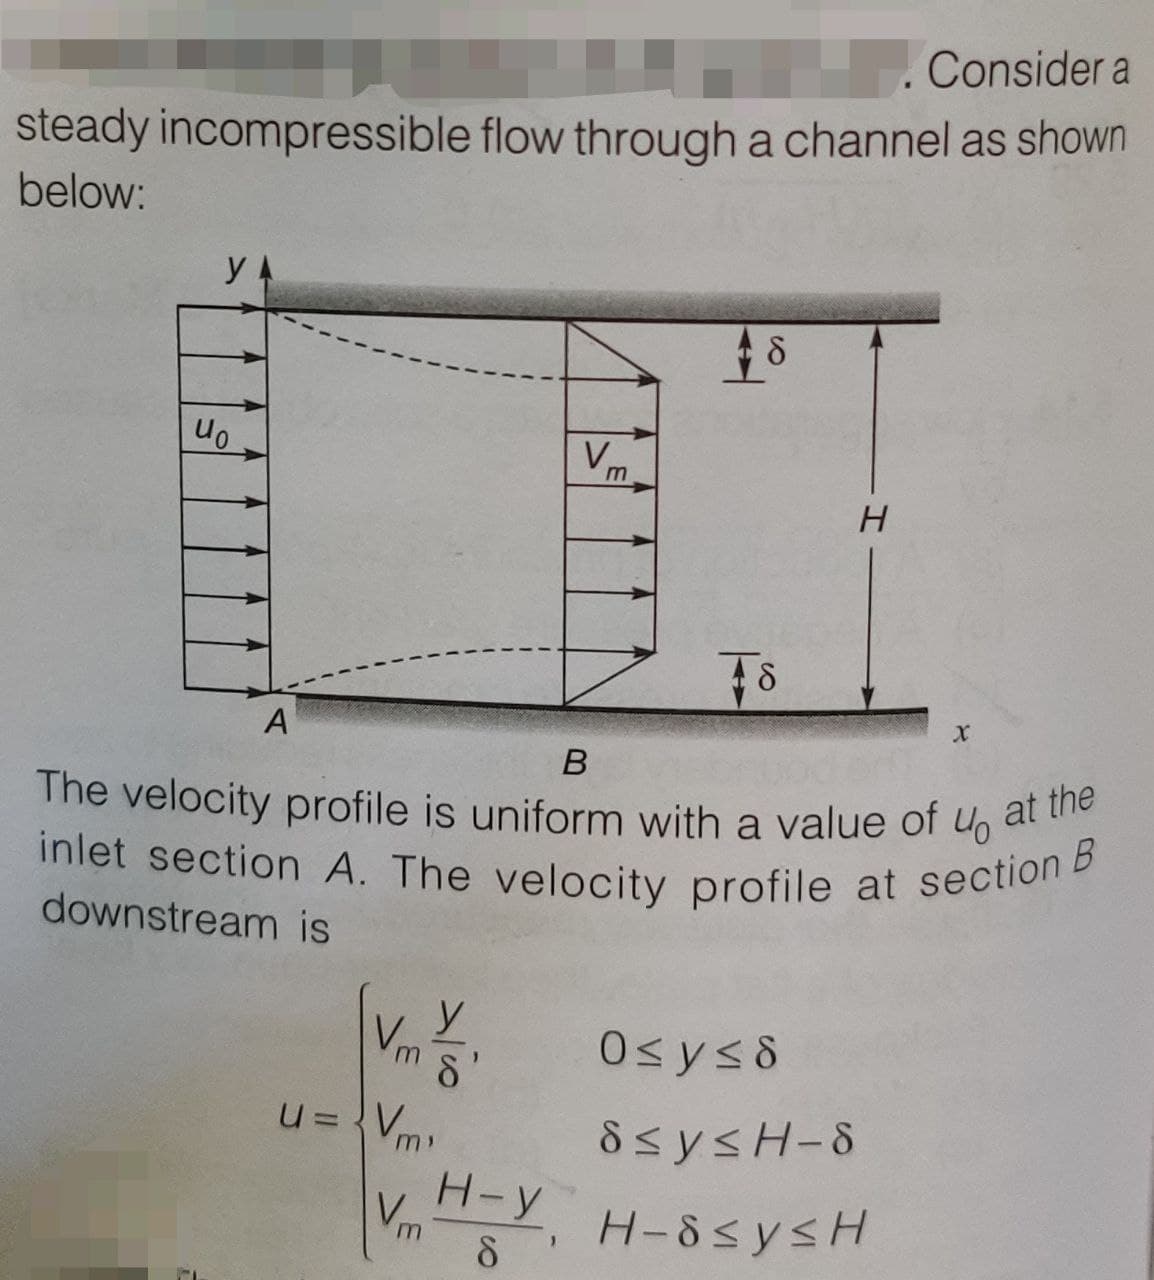 Consider a
steady incompressible flow through a channel as shown
below:
YA
uo
A
Vm
m s'
u=Vm)
Vm
V₁₁
Vm
B
The velocity profile is uniform with a value of
40
inlet section A. The velocity profile at section B
downstream is
H-Y
8
+8
TS
H
X
0≤y≤d
S≤y≤H-S
H-8≤y≤H
at the